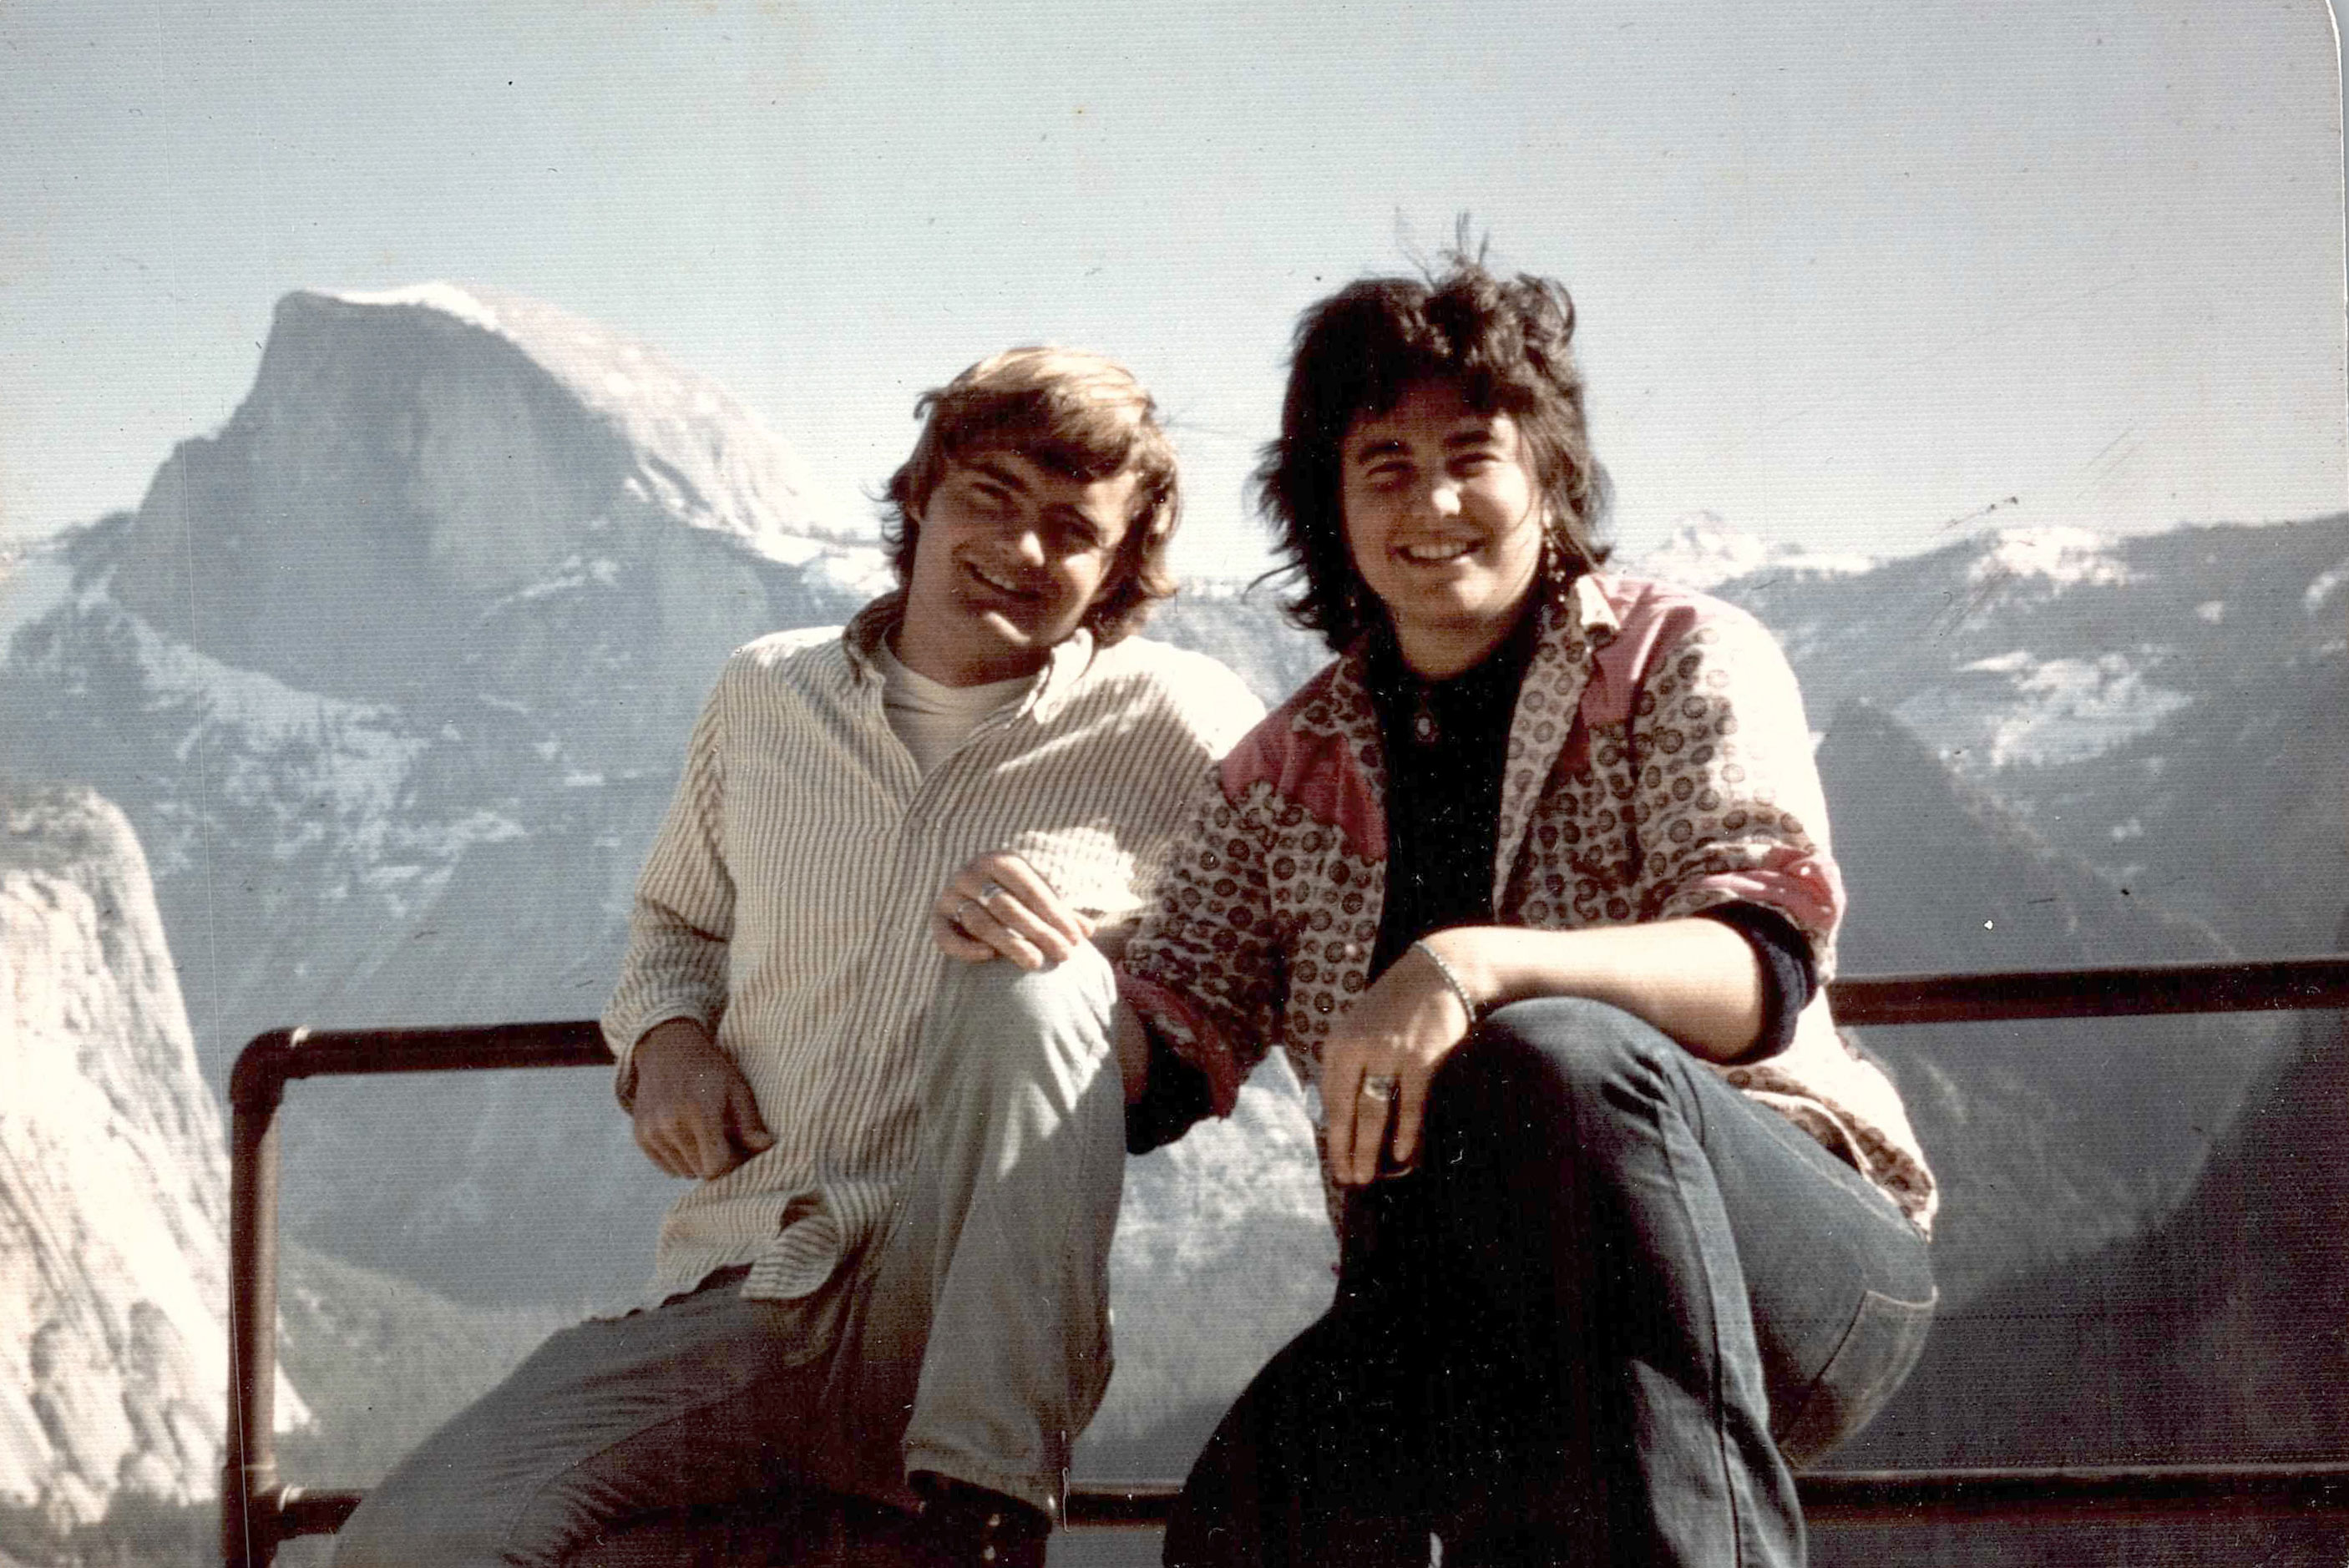 And old photo of two young people in front of half dome in Yosemite